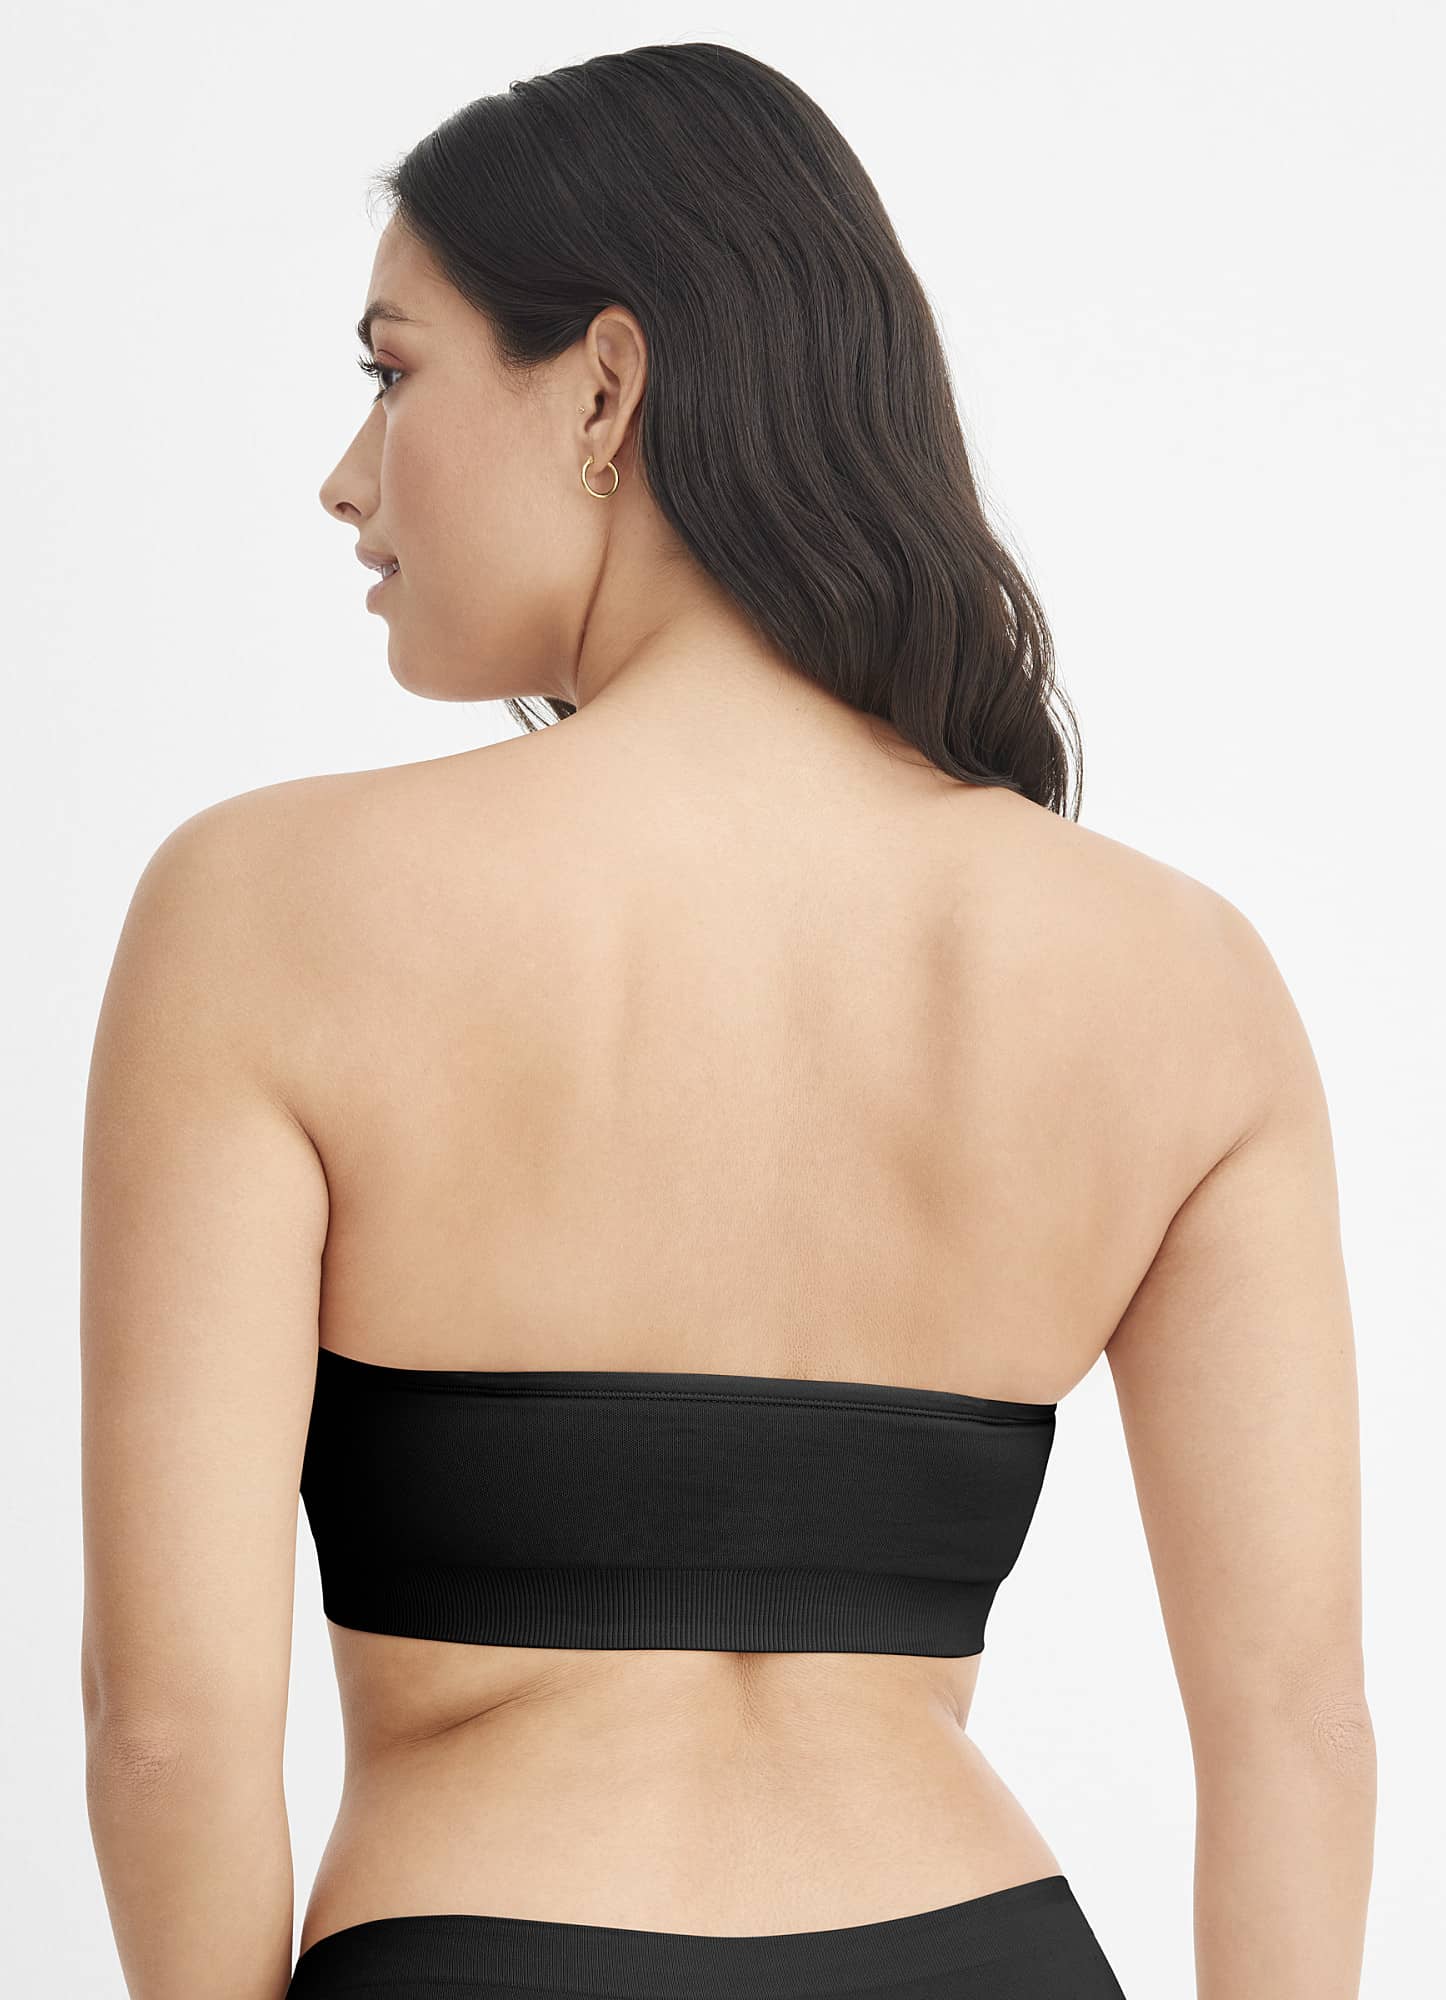 How to make a Bandeau out of a sports bra (I used a halter one, but you can  use a regular one). (